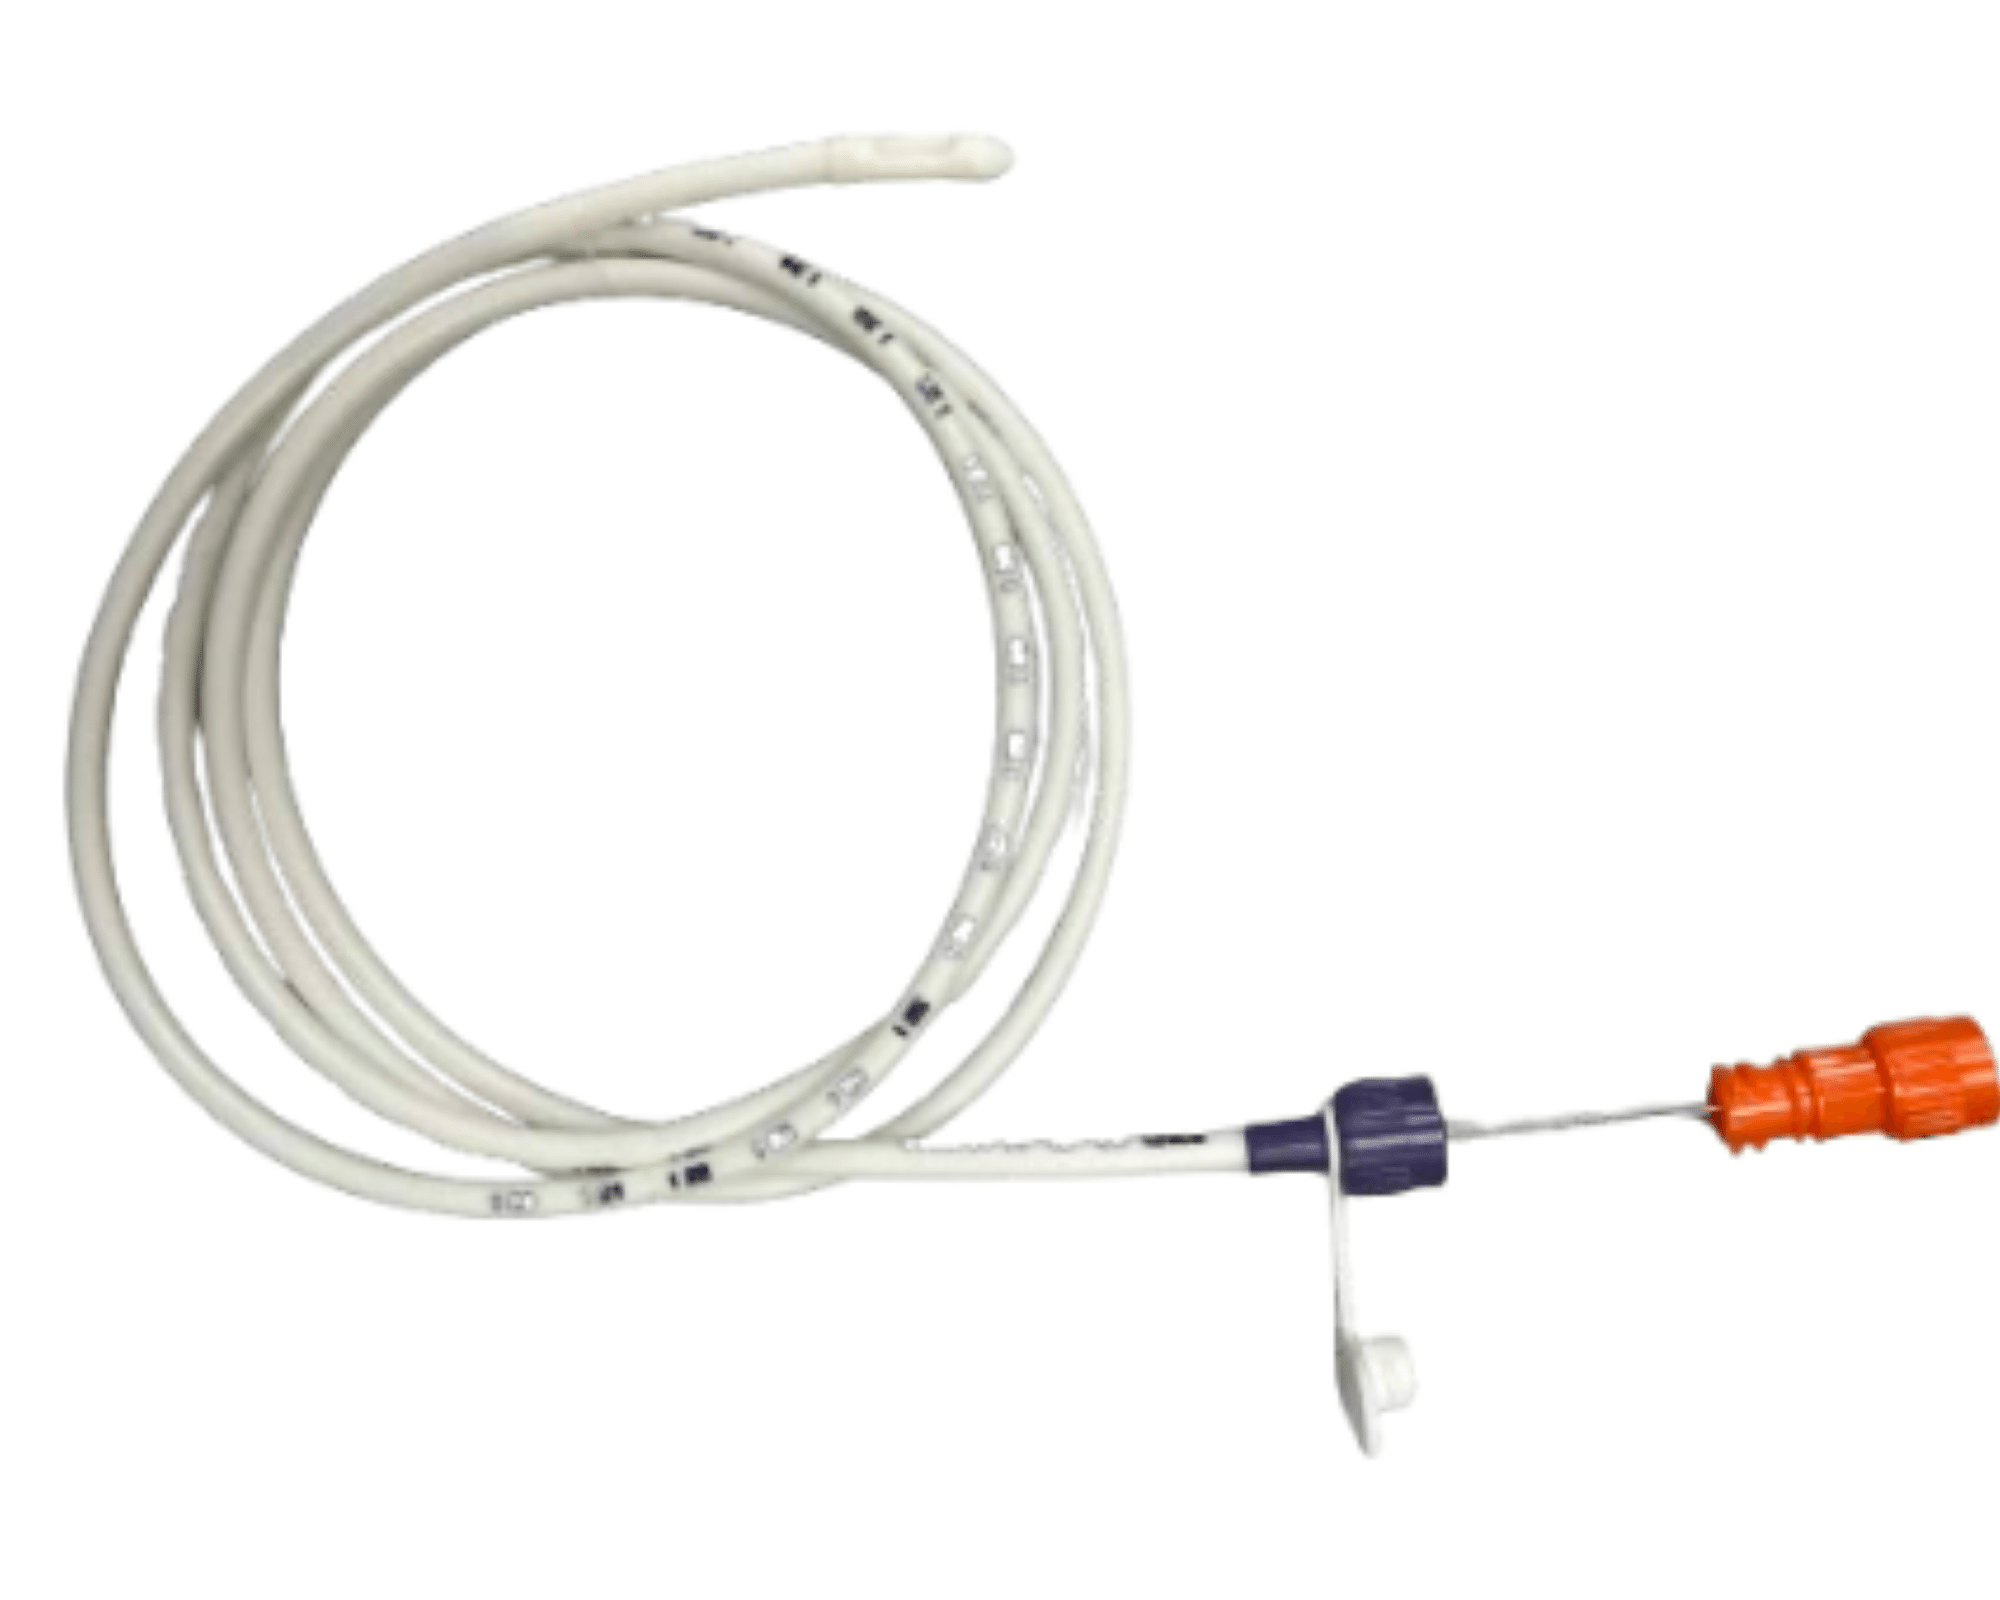 Nasogastric and nasoduodenal feeding tubes with guidewire and ENfit connector